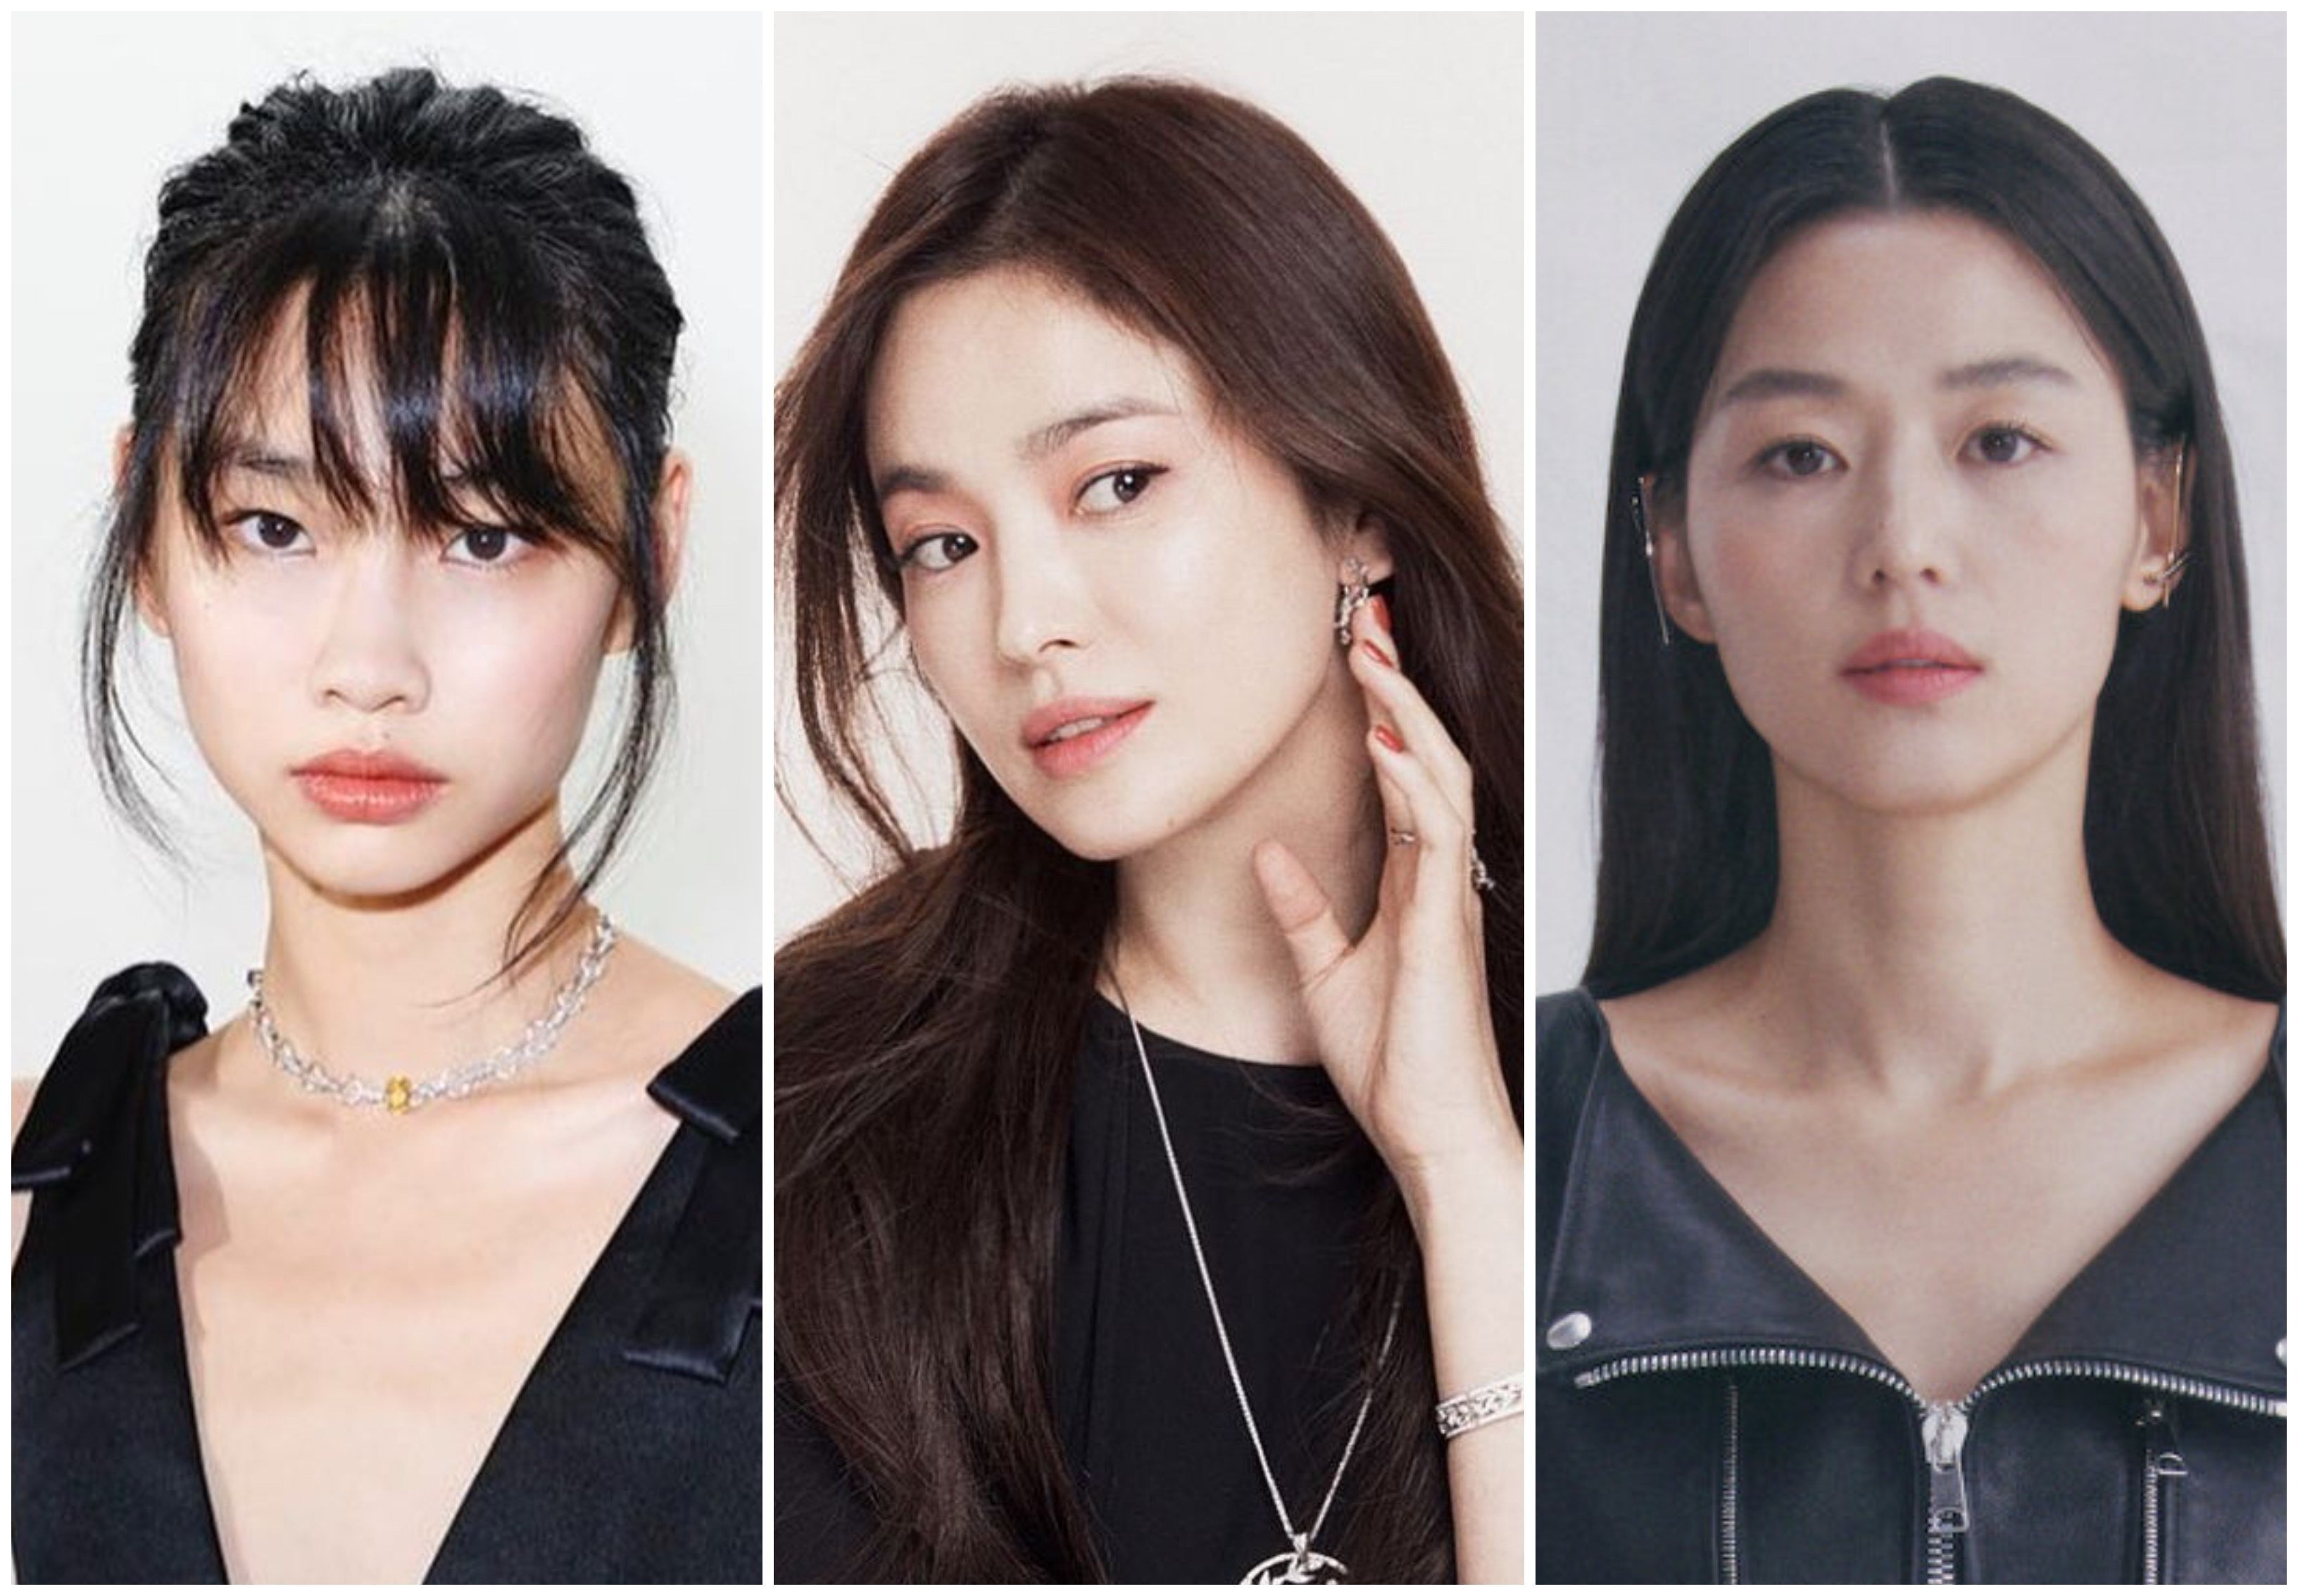 K-drama actresses Jung Ho-yeon, Song Hye-kyo and Jun Ji-hyun all got their starts in the industry as models. Photos: @hoooooyeony, @kyo1122/Instagram; Alexander McQueen